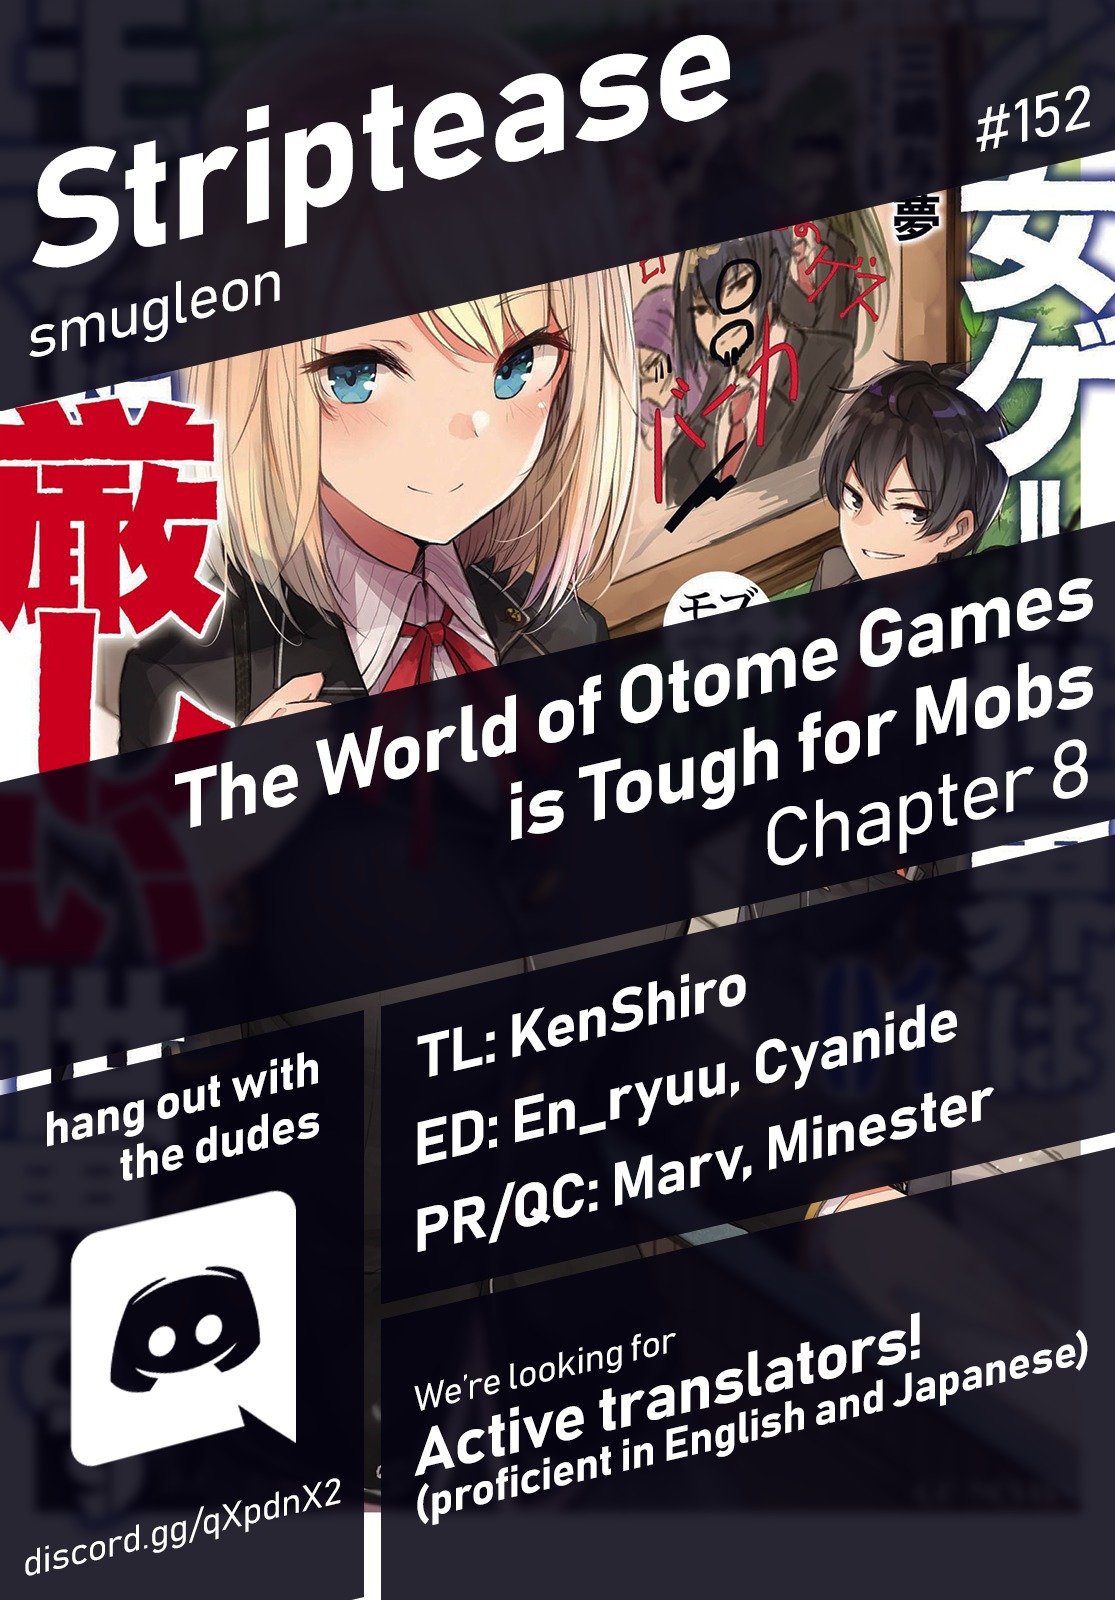 The World of Otome Games is Tough for Mobs ch.8